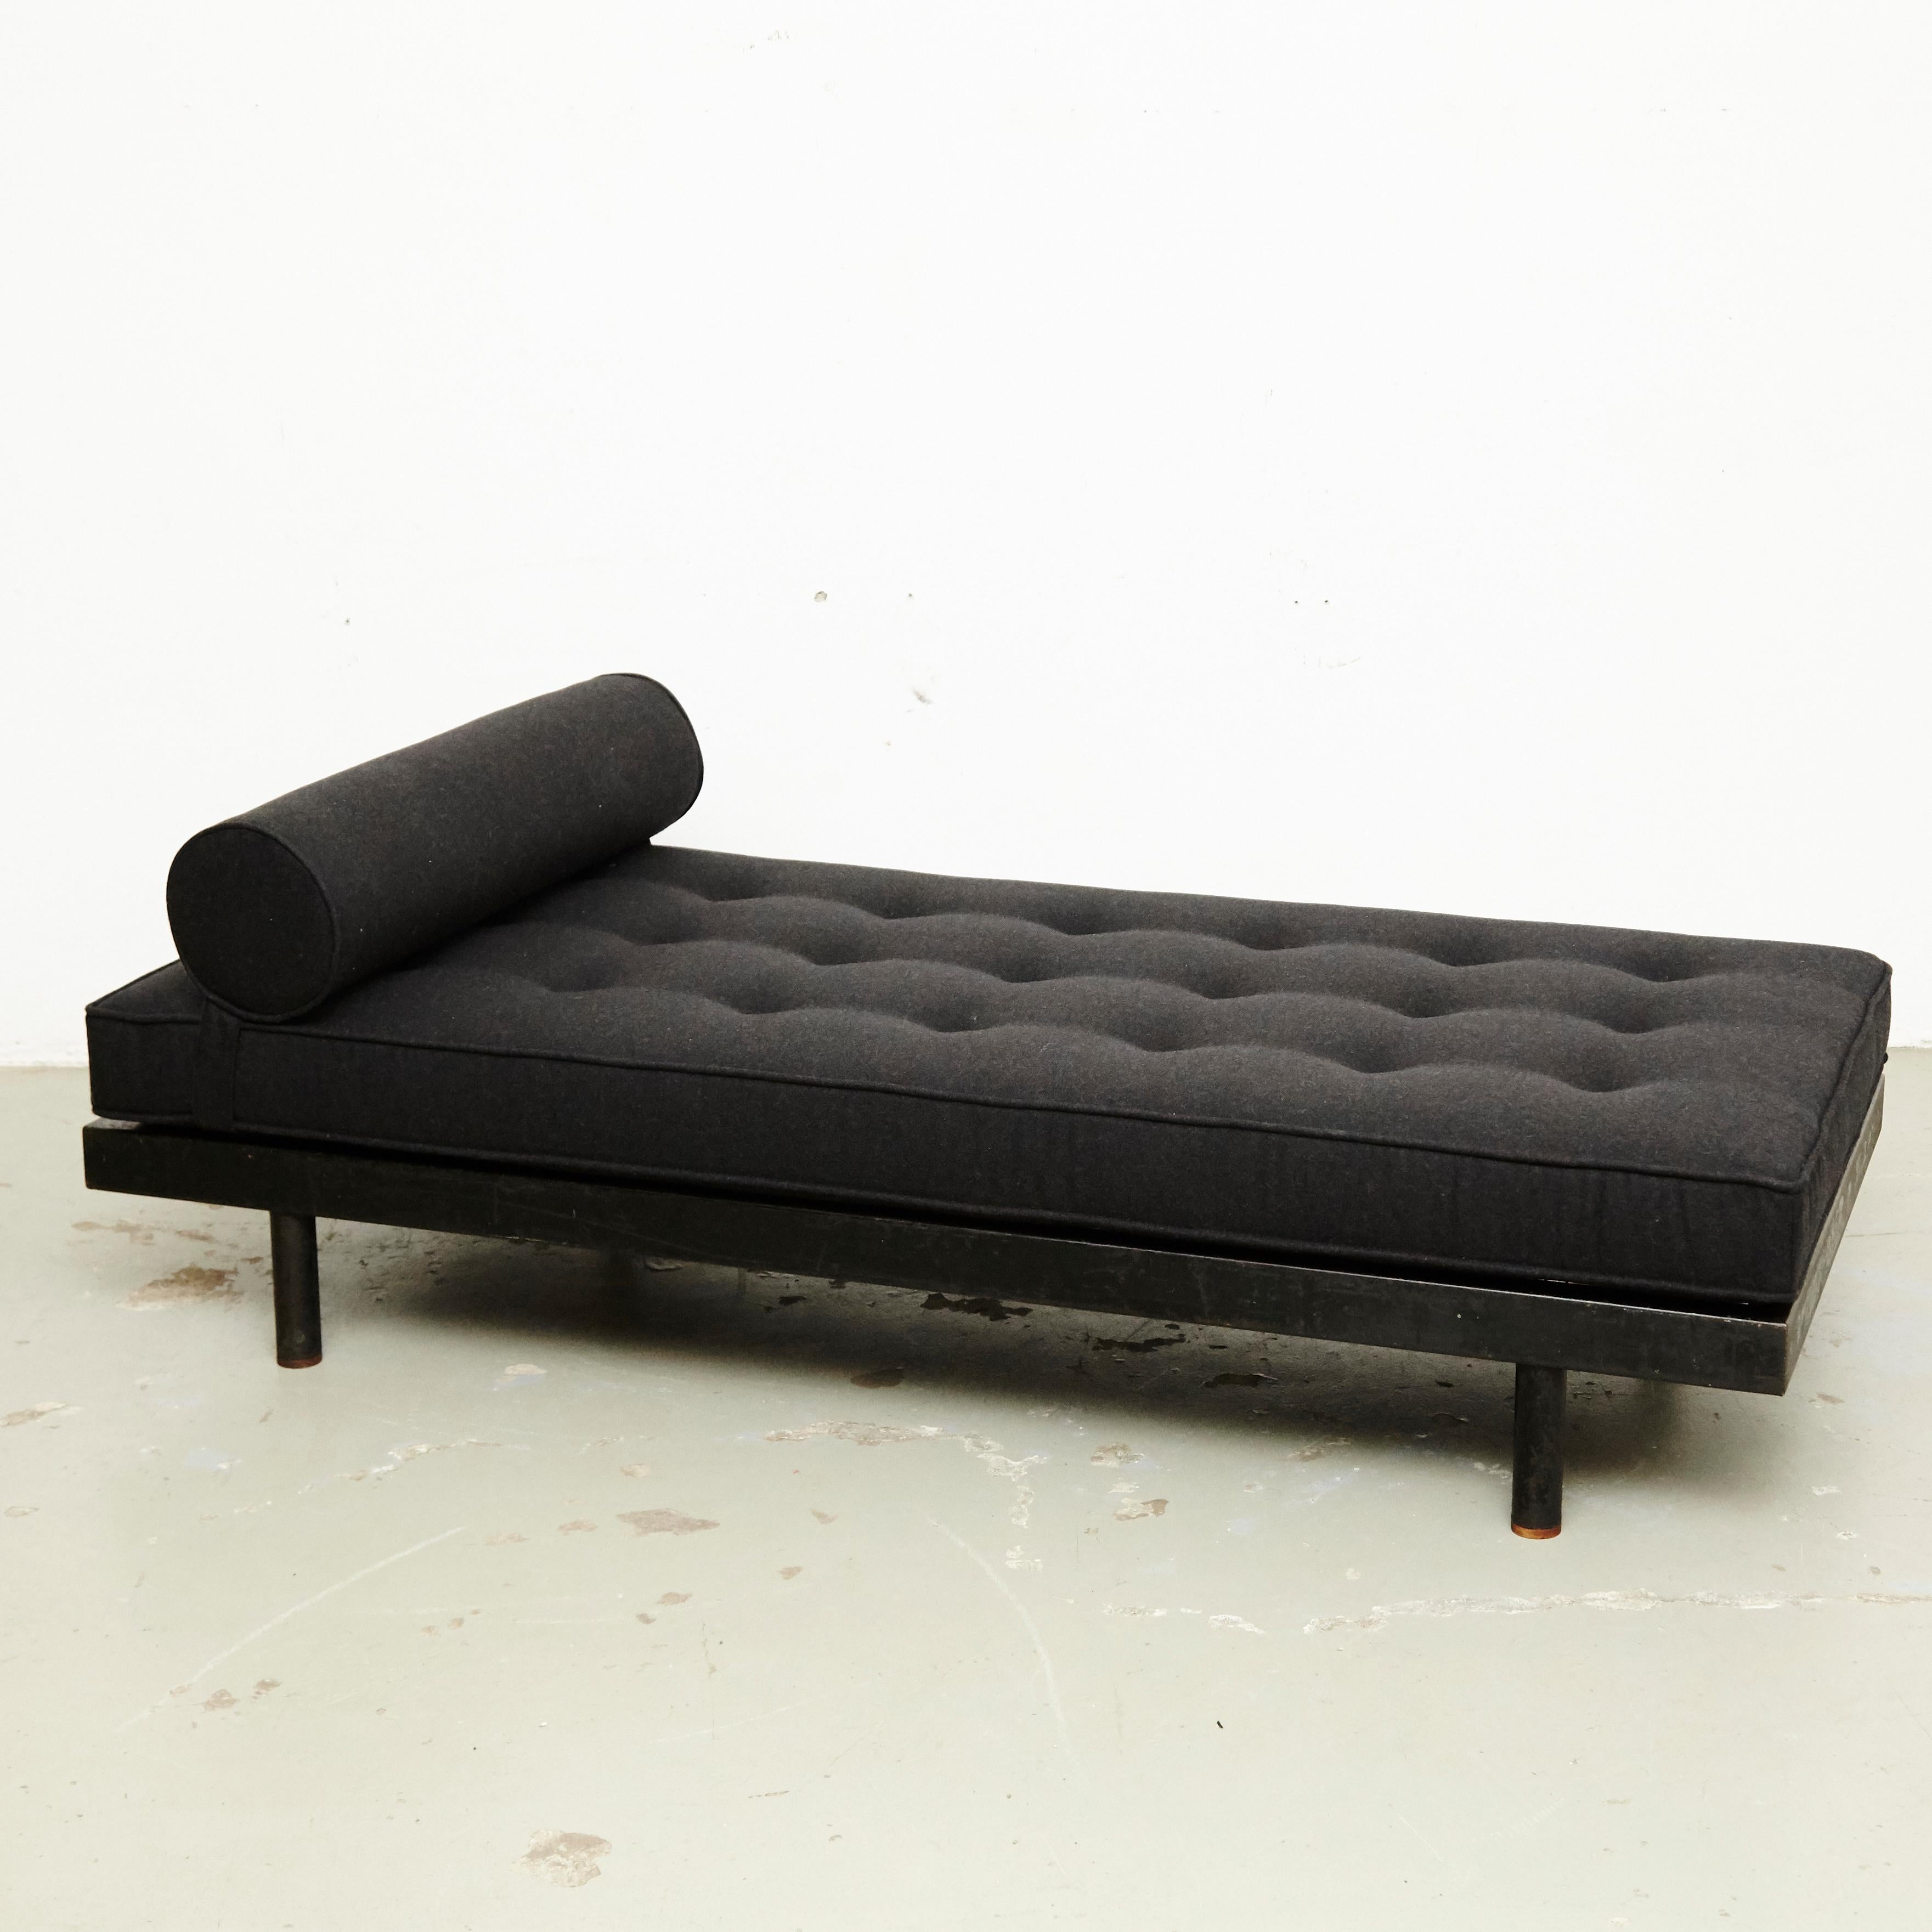 French Jean Prouvé Daybed in Black Metal, circa 1950